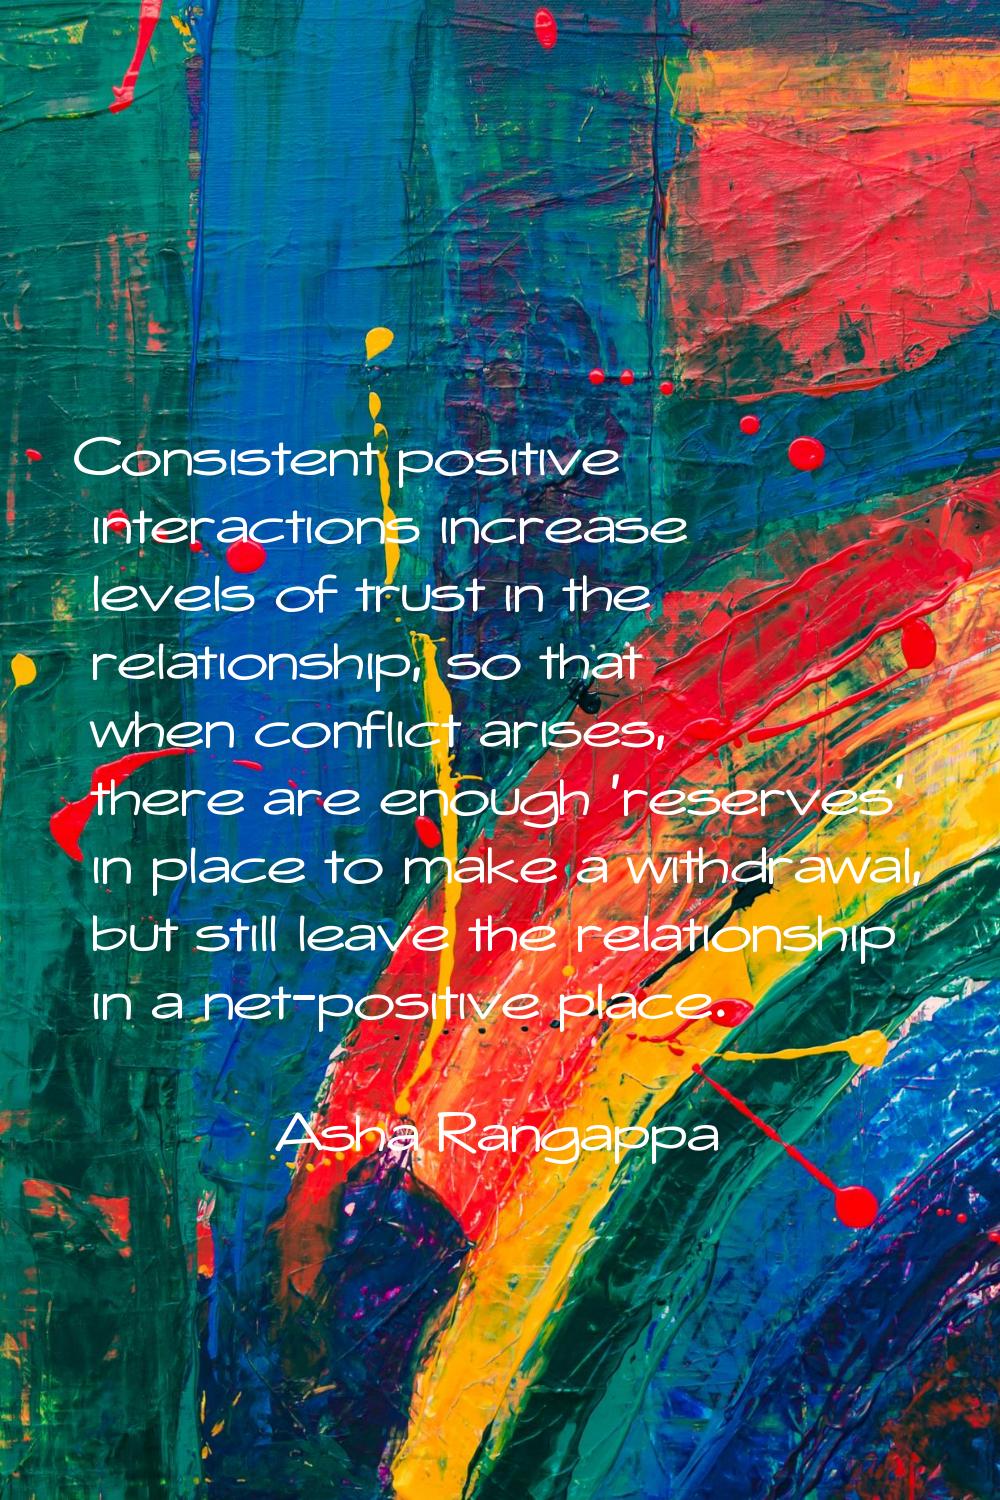 Consistent positive interactions increase levels of trust in the relationship, so that when conflic